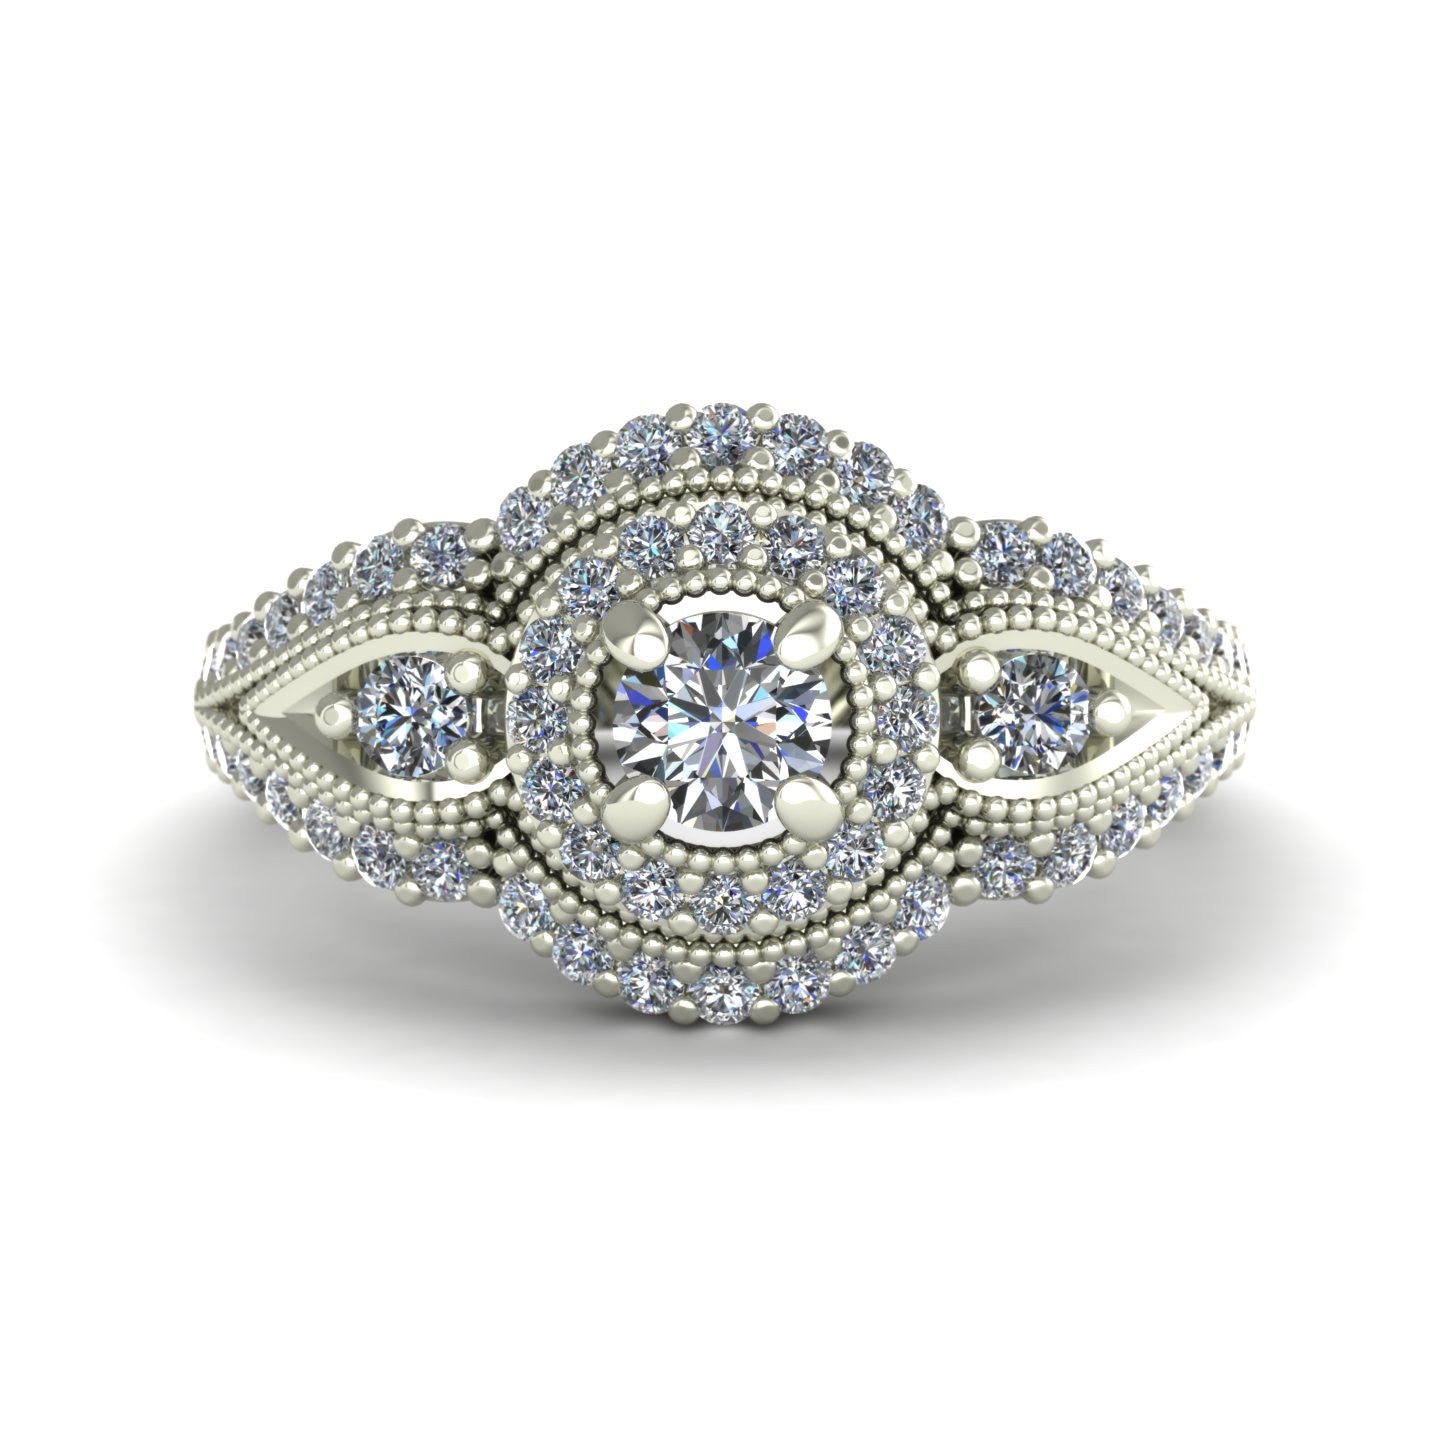 Diamond halo engagement ring with diamond border in 14k white gold - Charles Babb Designs - top view